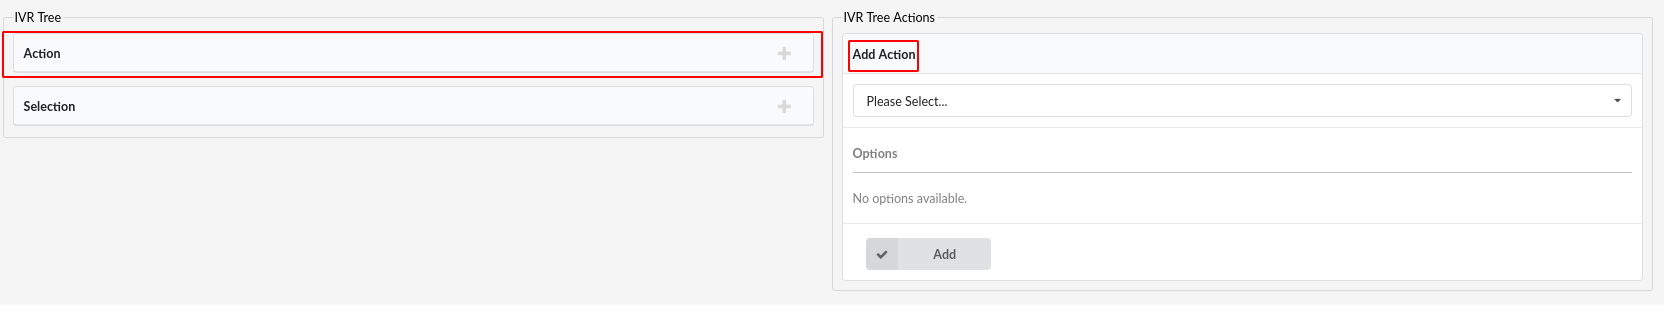 31-ivr-tree-add-action.png